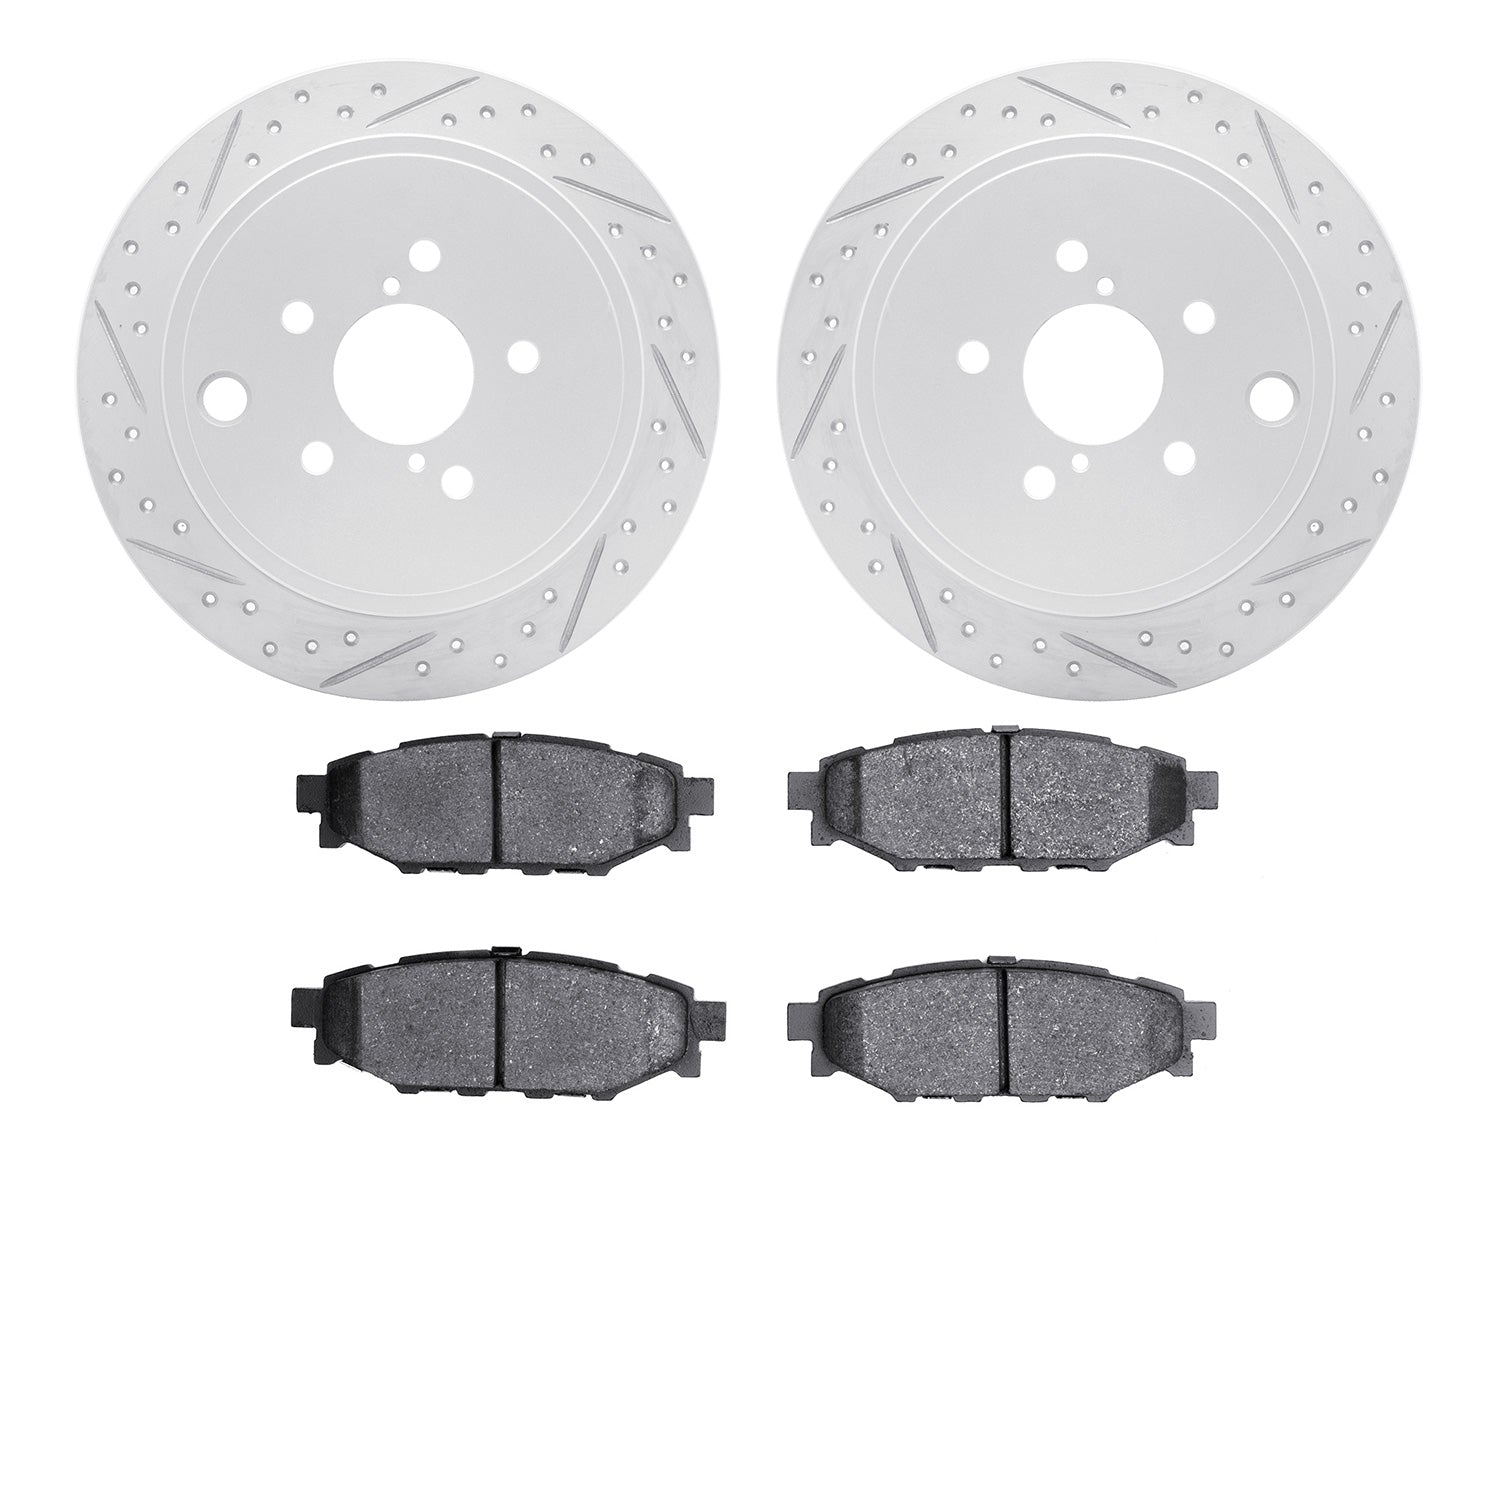 R1 Concepts Brake Rotors Carbon Coated D/S w/Optimum OE Pads Subaru BRZ 2015-13, Forester 2013-09, Impreza 2014-08, Legacy 2014-10, Outback 2014-10, WRX 2014-12 - Dirty Racing Products